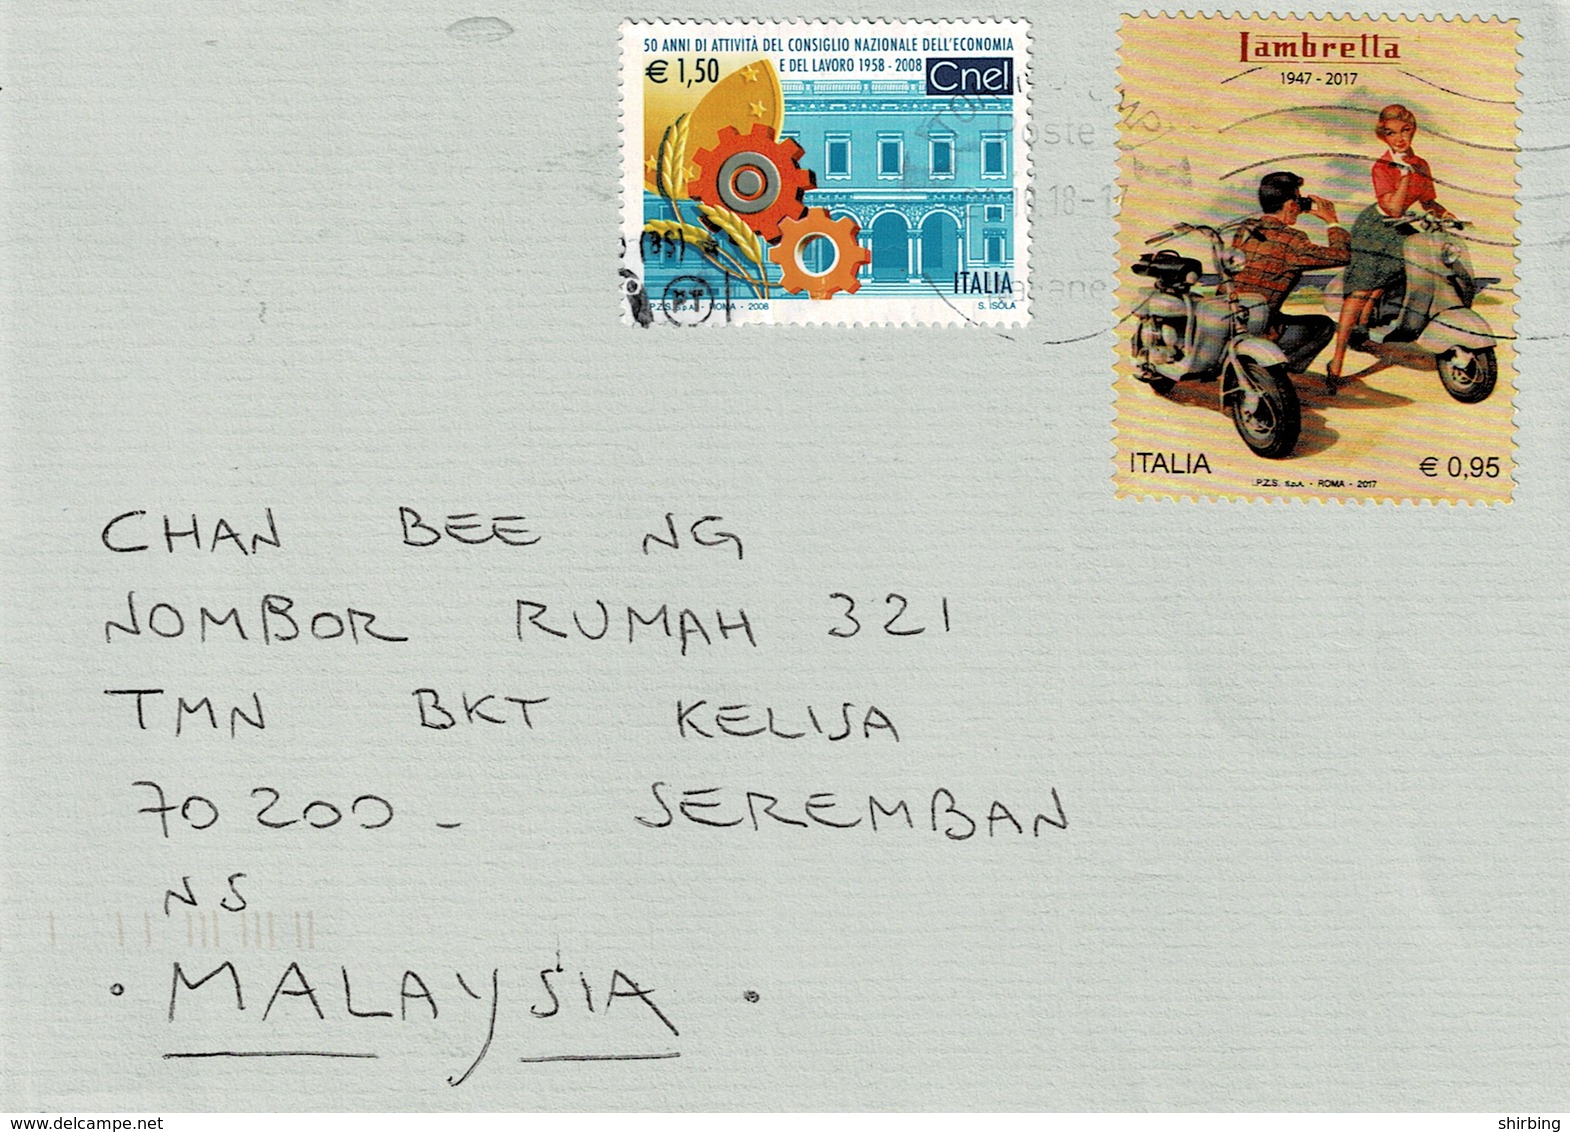 24M : Italy Boy & Girl, Scooter, Motobike, Bicycle, Camera, Gear Logo  Stamp Used On Cover - Stamped Stationery